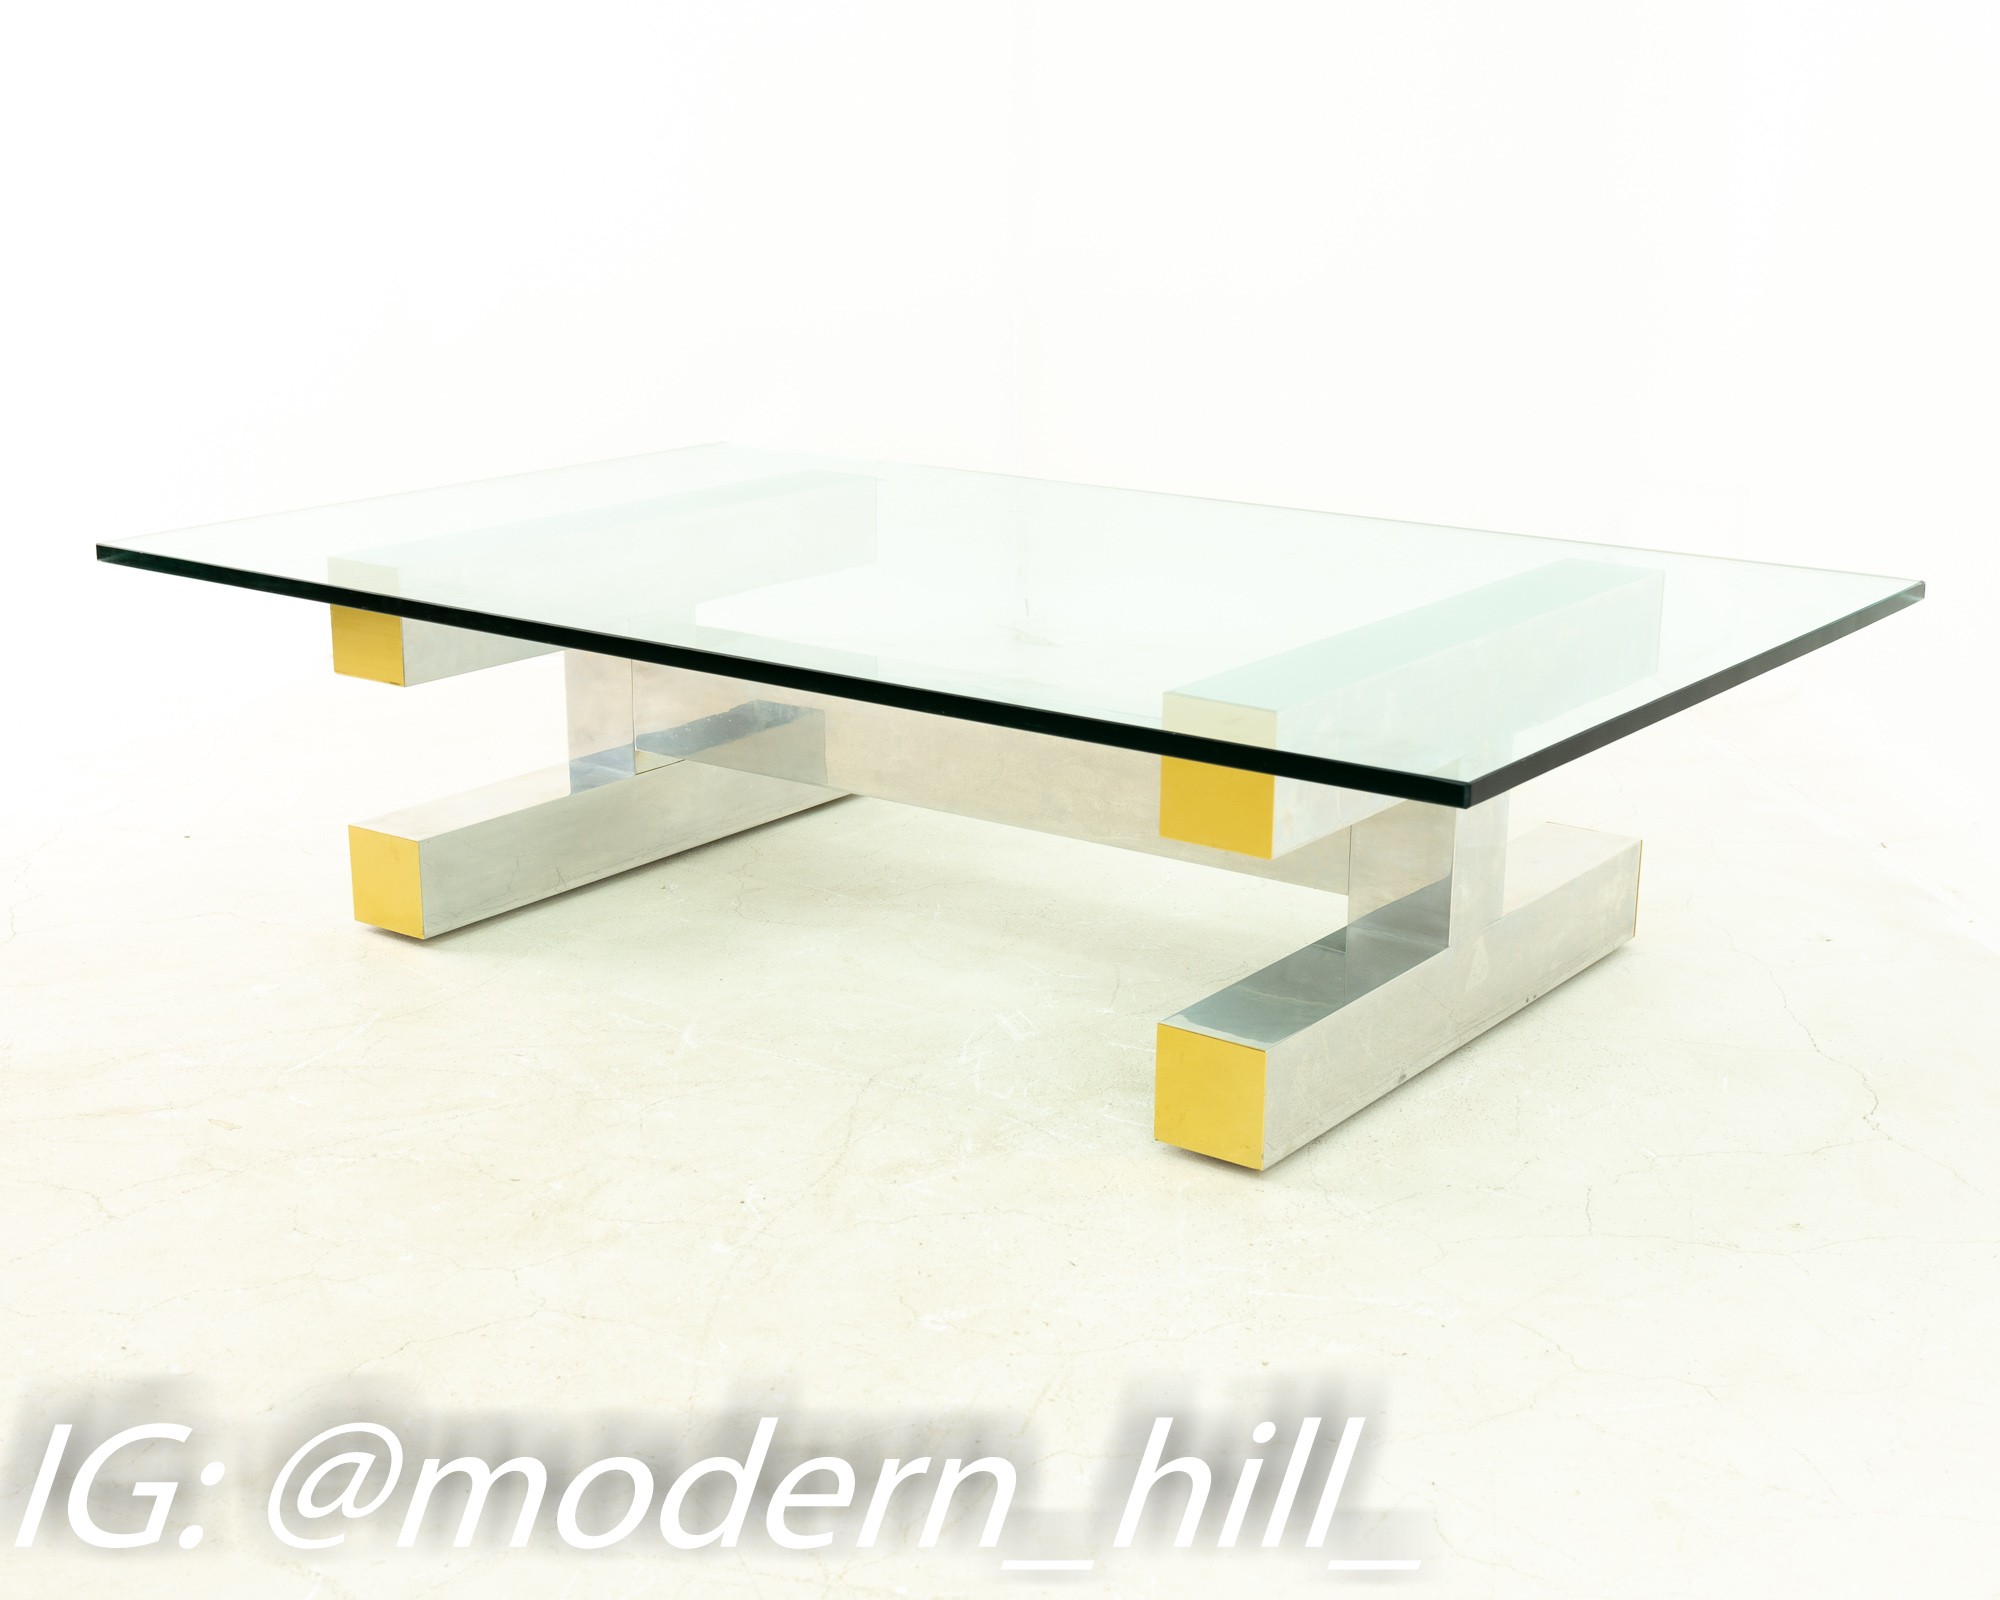 Paul Evans Style Cityscape Brass and Polished Aluminum Glass Coffee Table